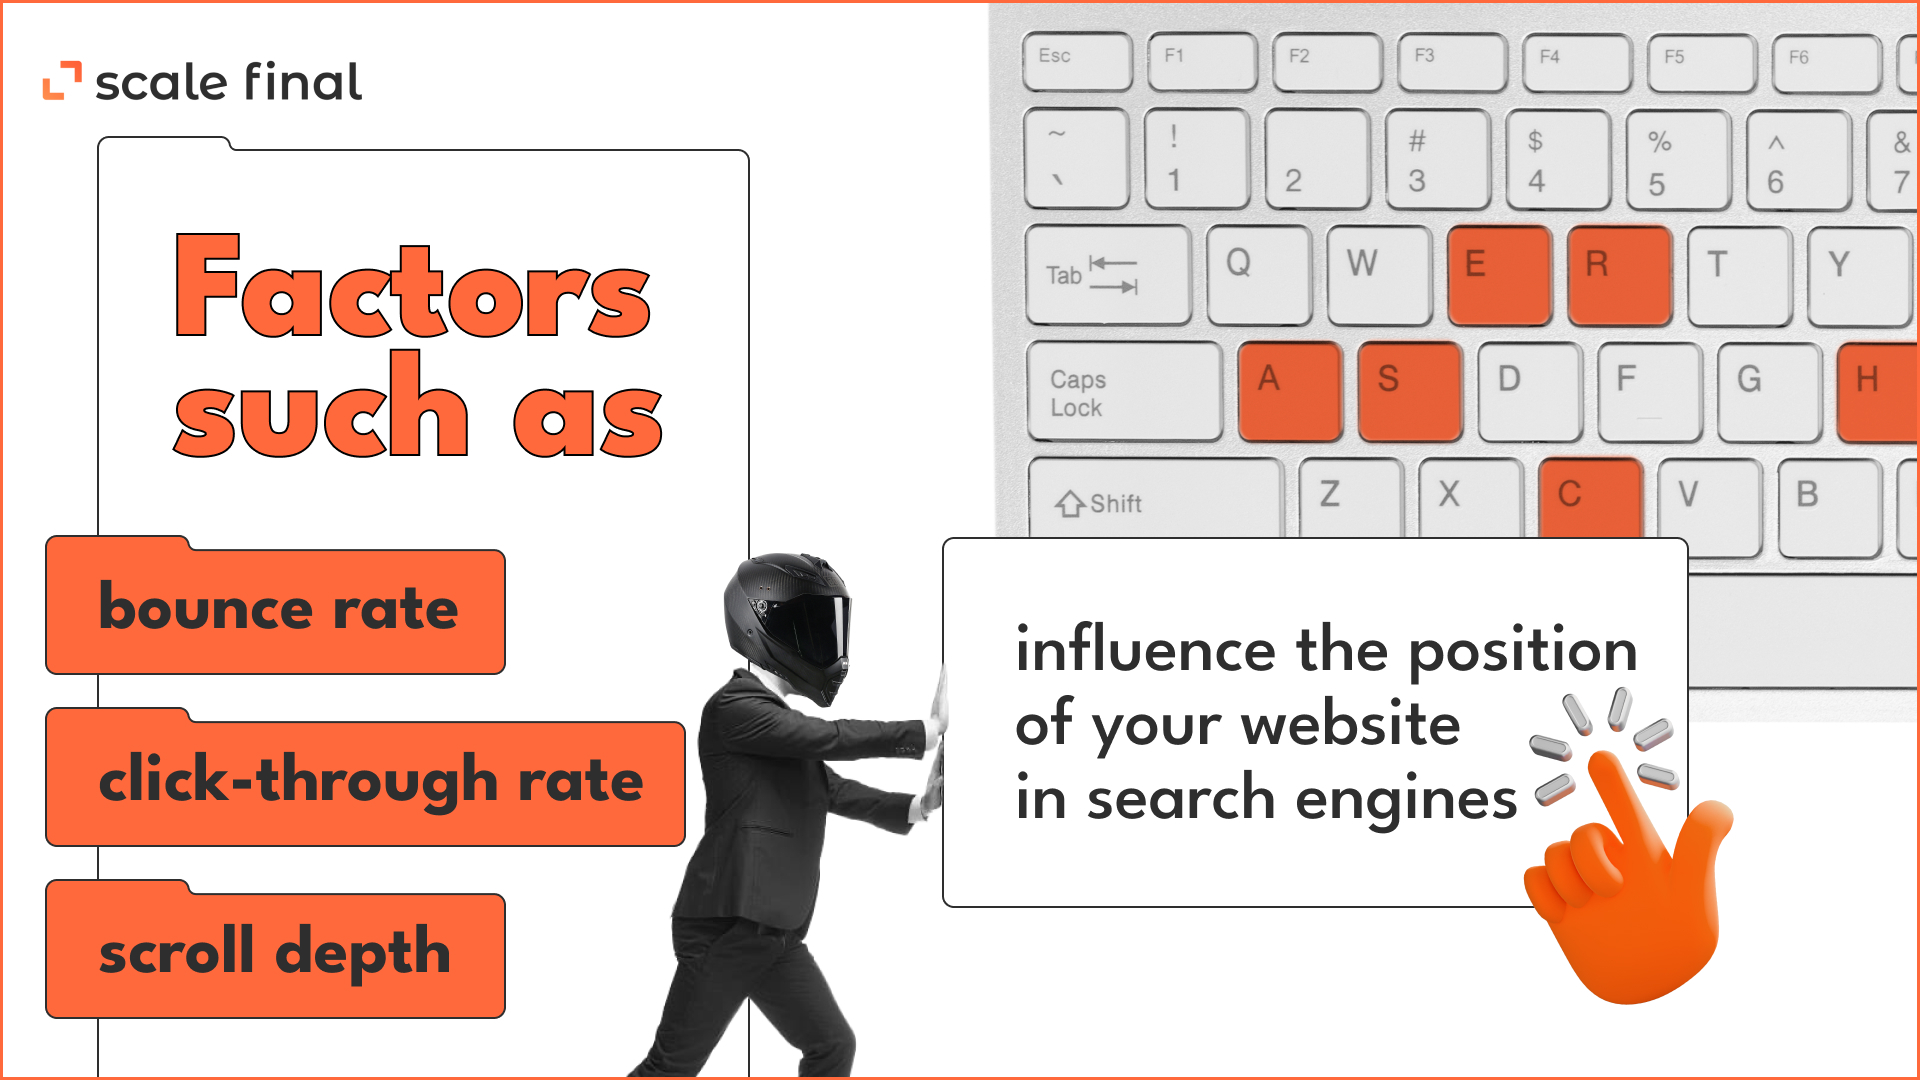 factors such as bounce rate, click-through rate and scroll depth influence the position of your site in search engines 